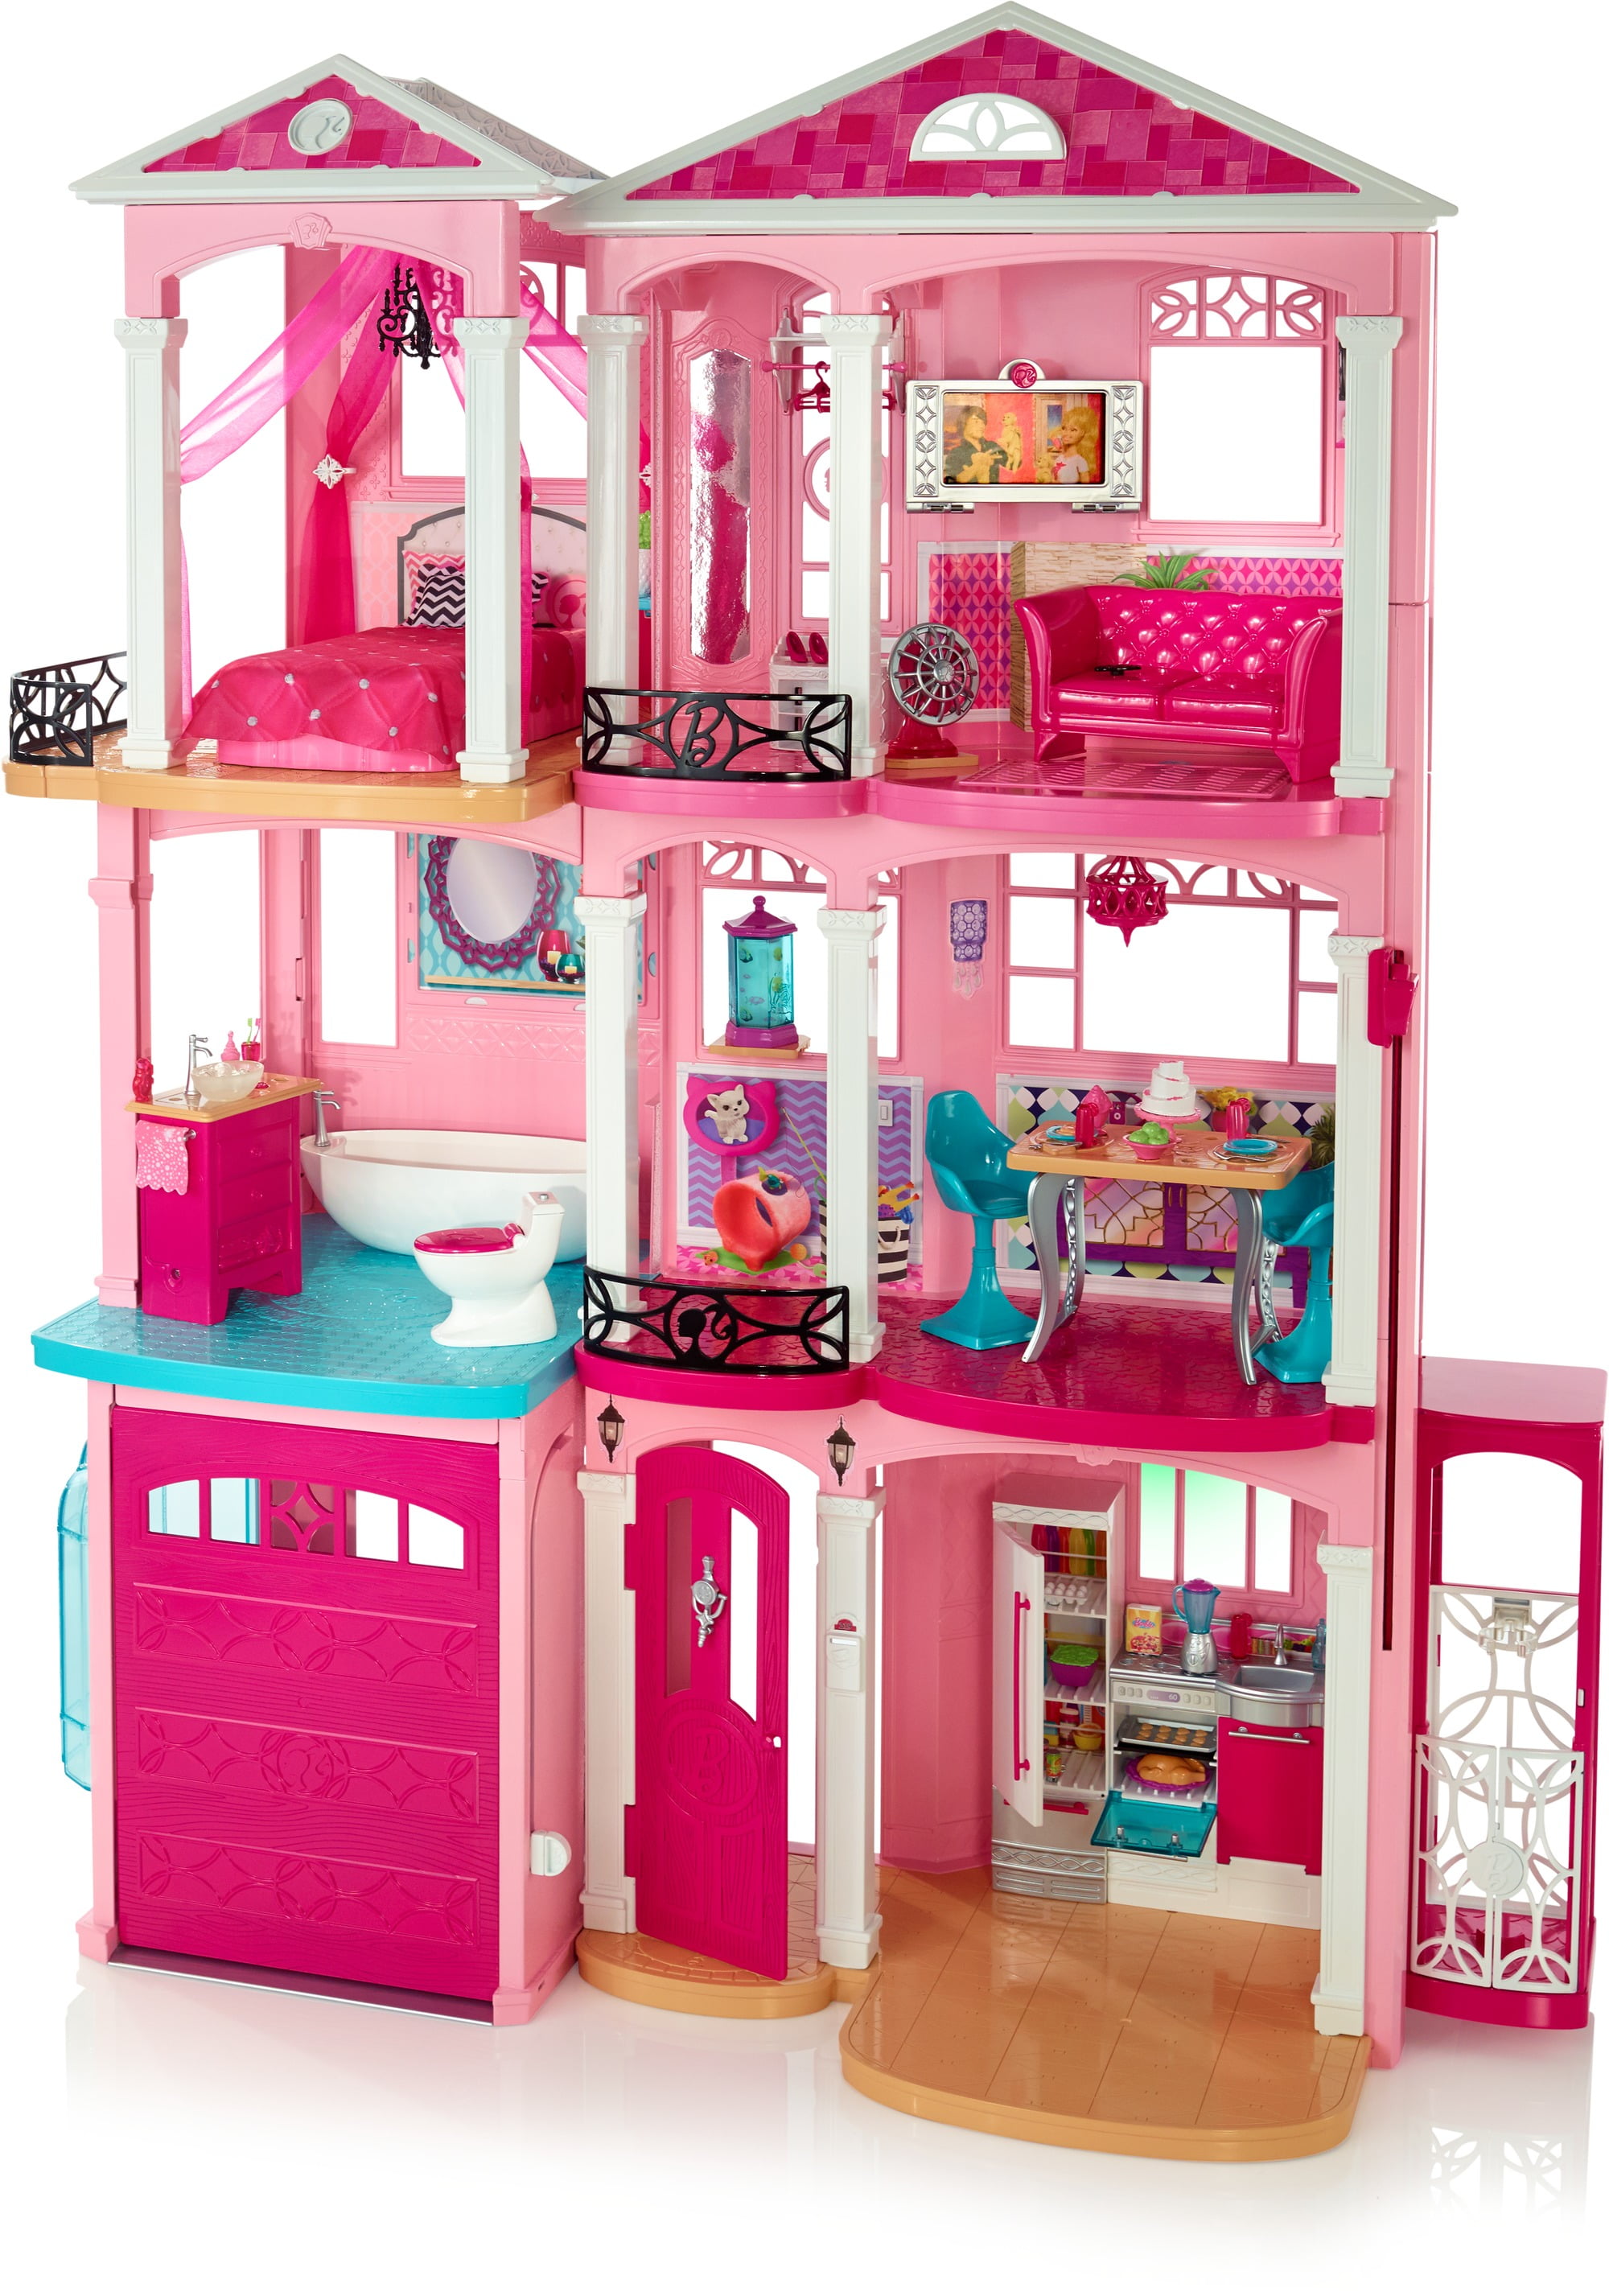 NEW Barbie DreamHouse Playset with 70 Accessory Pieces!! 